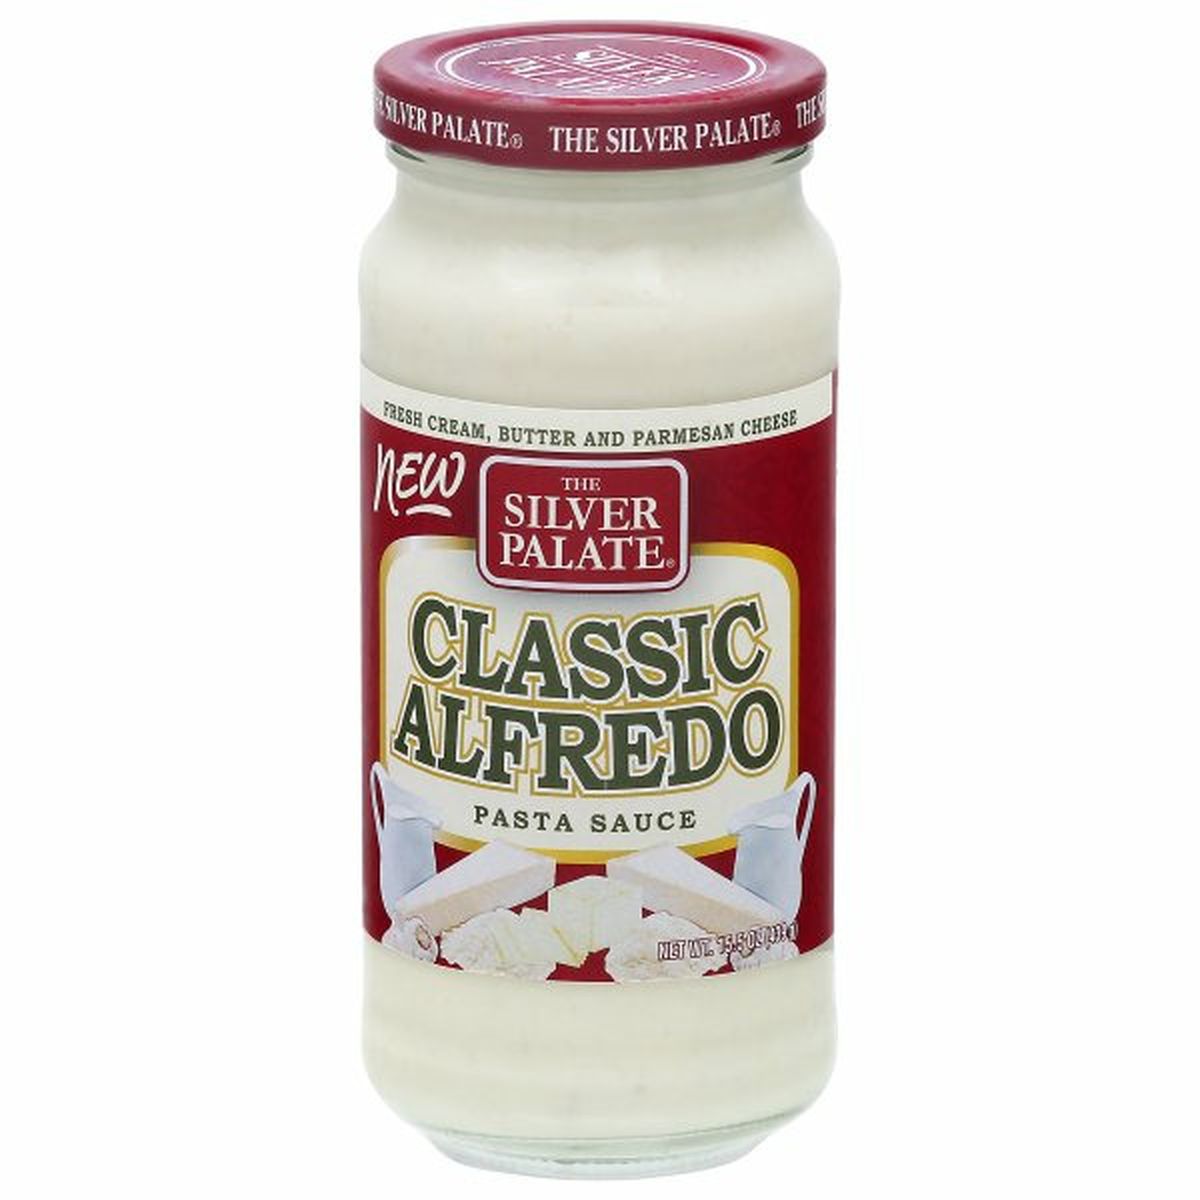 Calories in The Silver Palate Pasta Sauce, Classic Alfredo